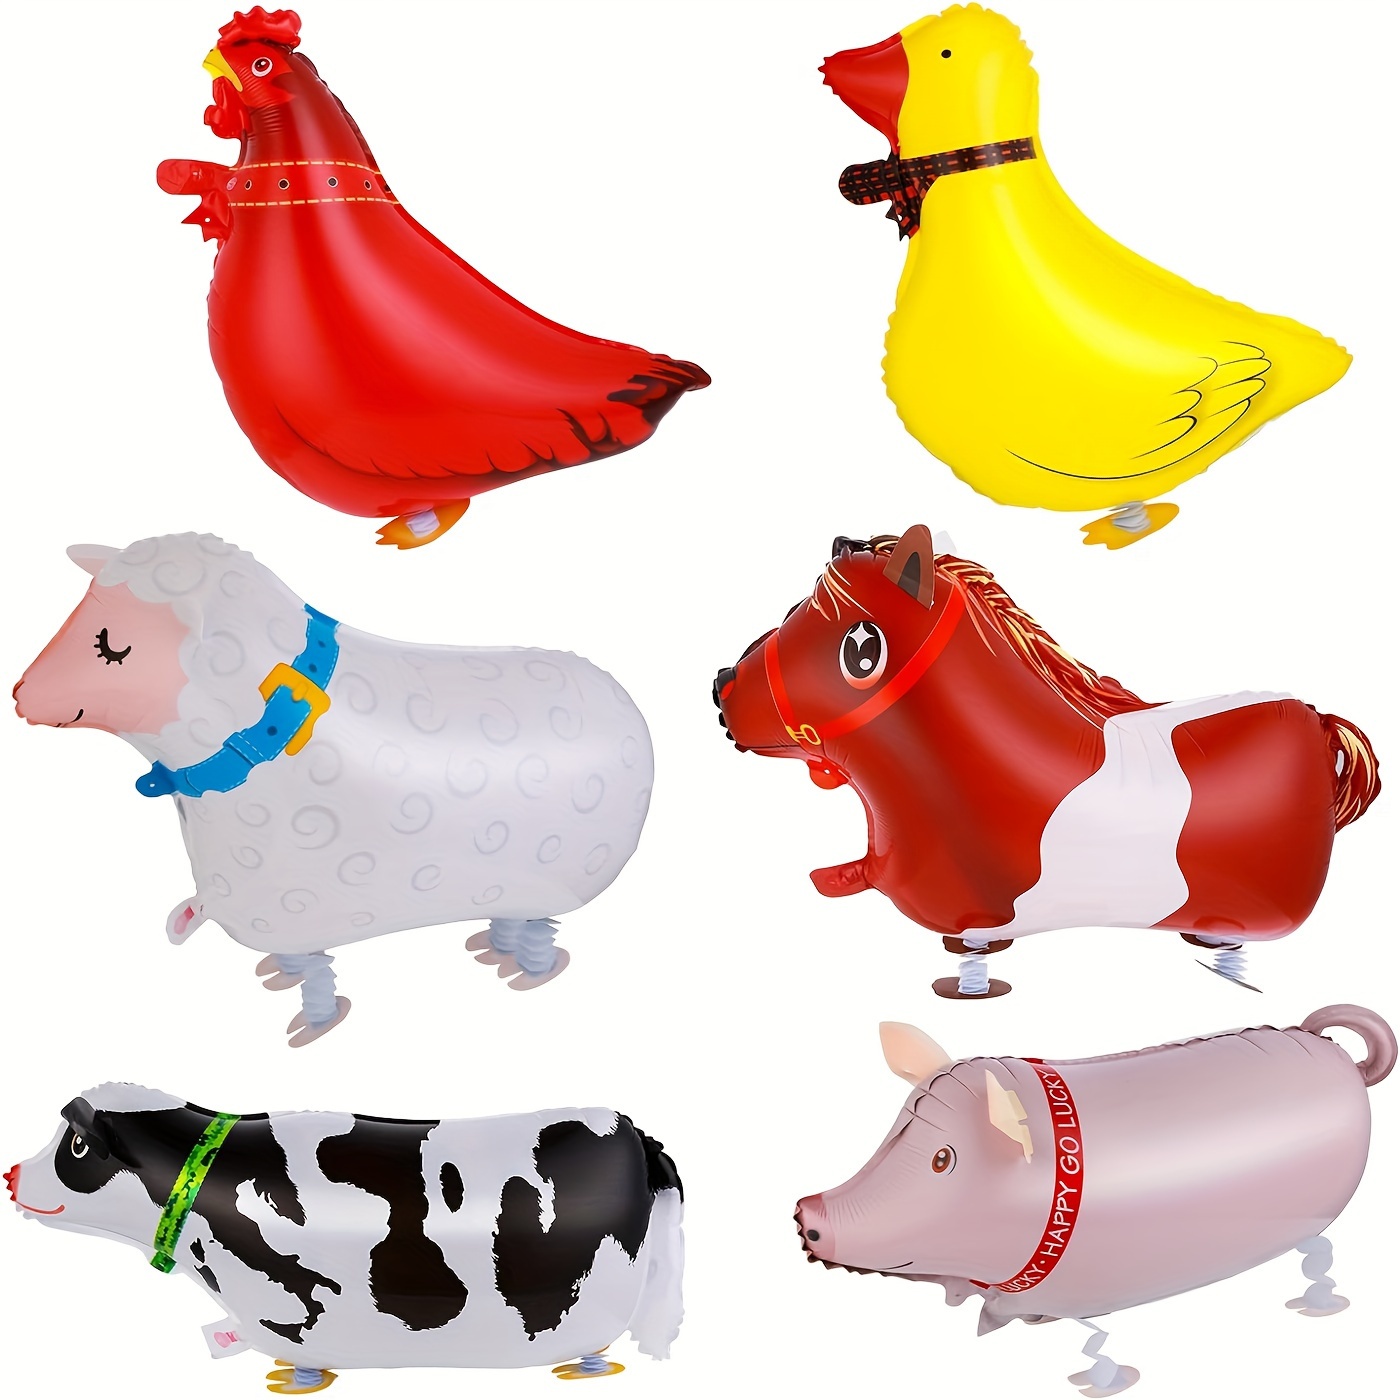 

6pcs, Farm Animal Balloons - Pack Of 6 Walking Balloons For Birthday Party Decorations And Aesthetic Room Decor - Includes Pony, Duck, Rooster, Cow, Pig, And Sheep